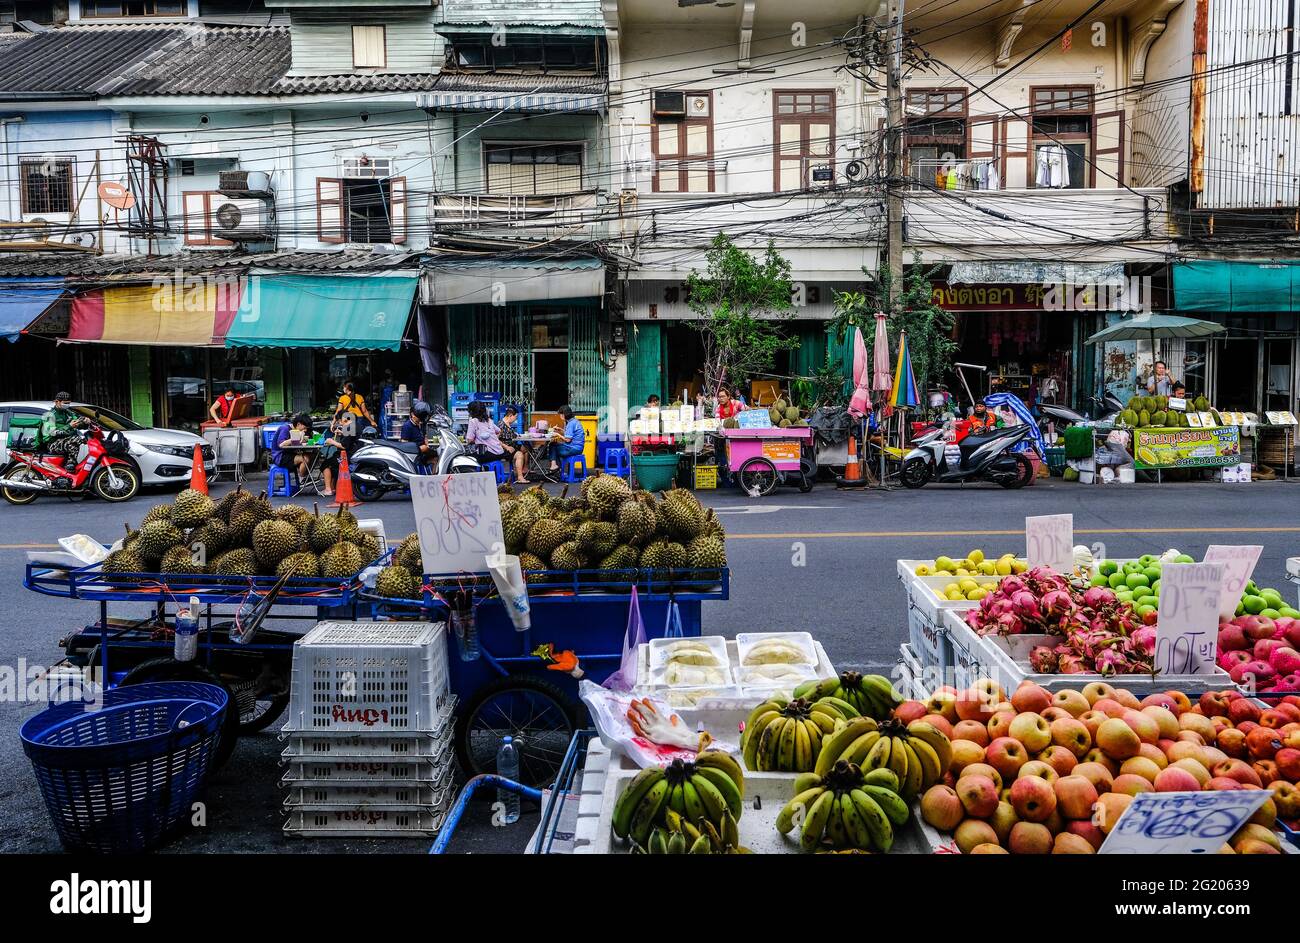 An outdoor fruit and vegetable market in Chinatown, Bangkok, Thailand Stock Photo